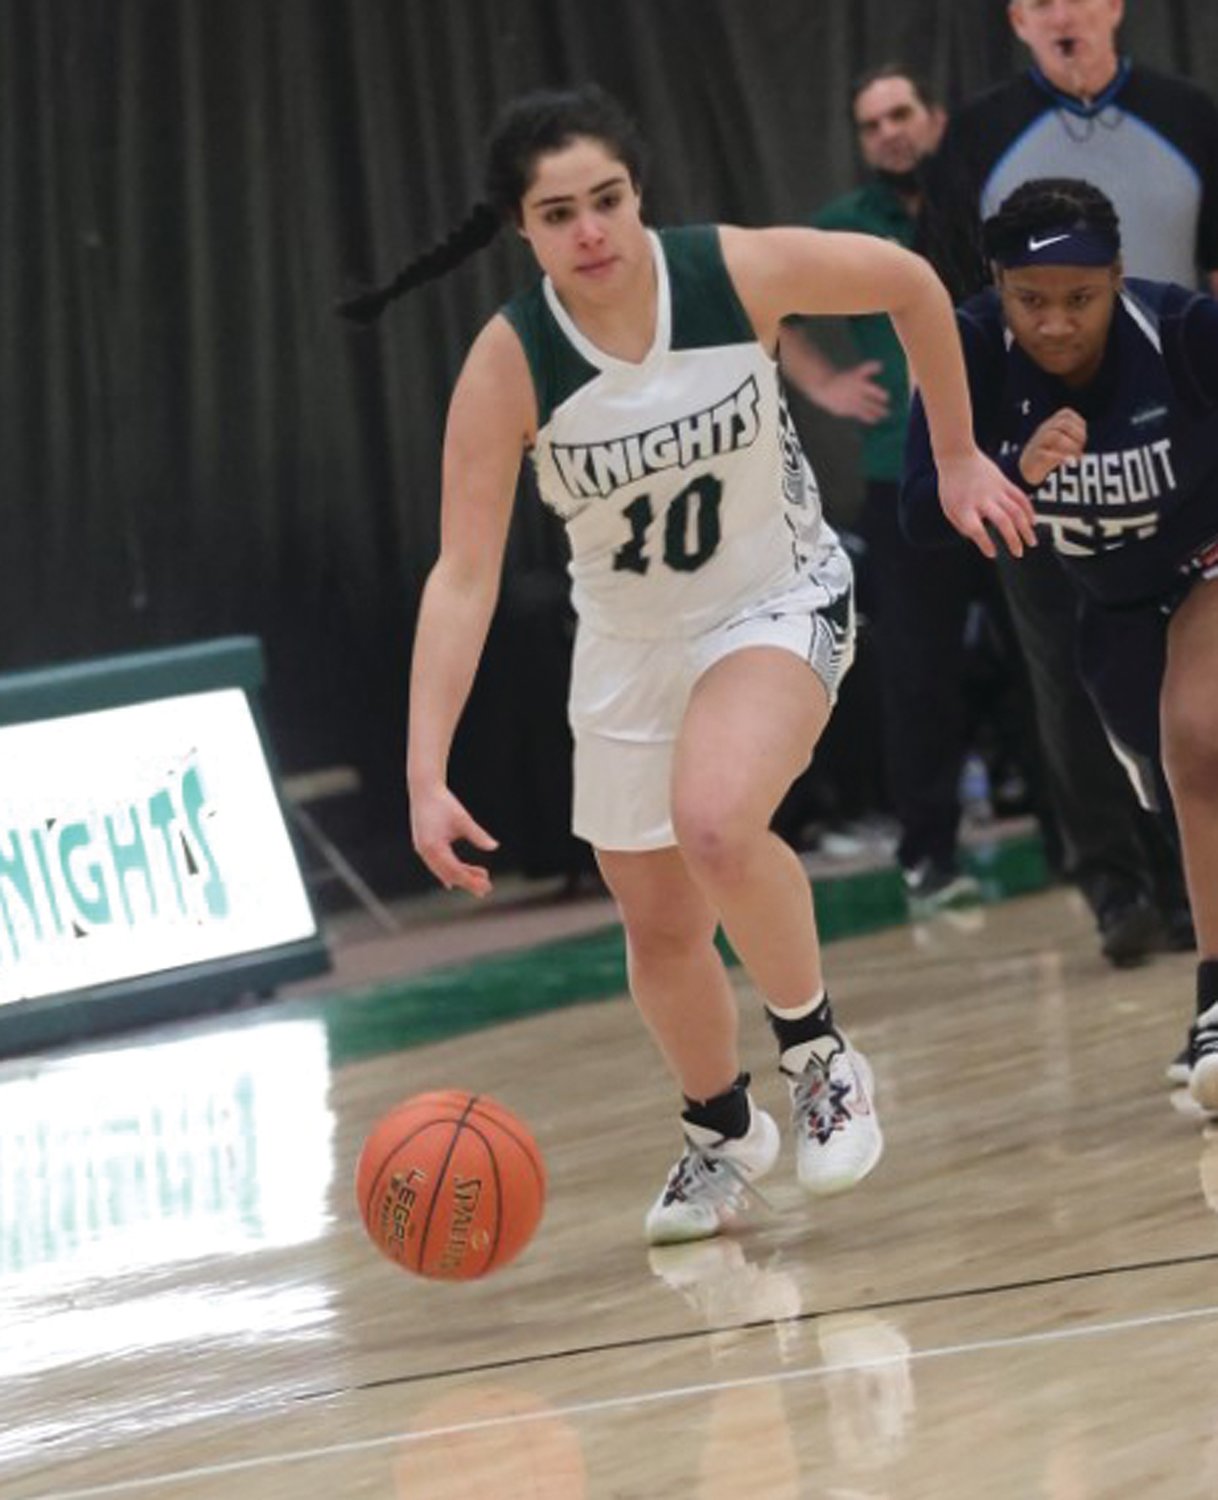 UP THE COURT: Talia Thibodeau dribbles up the court this season.